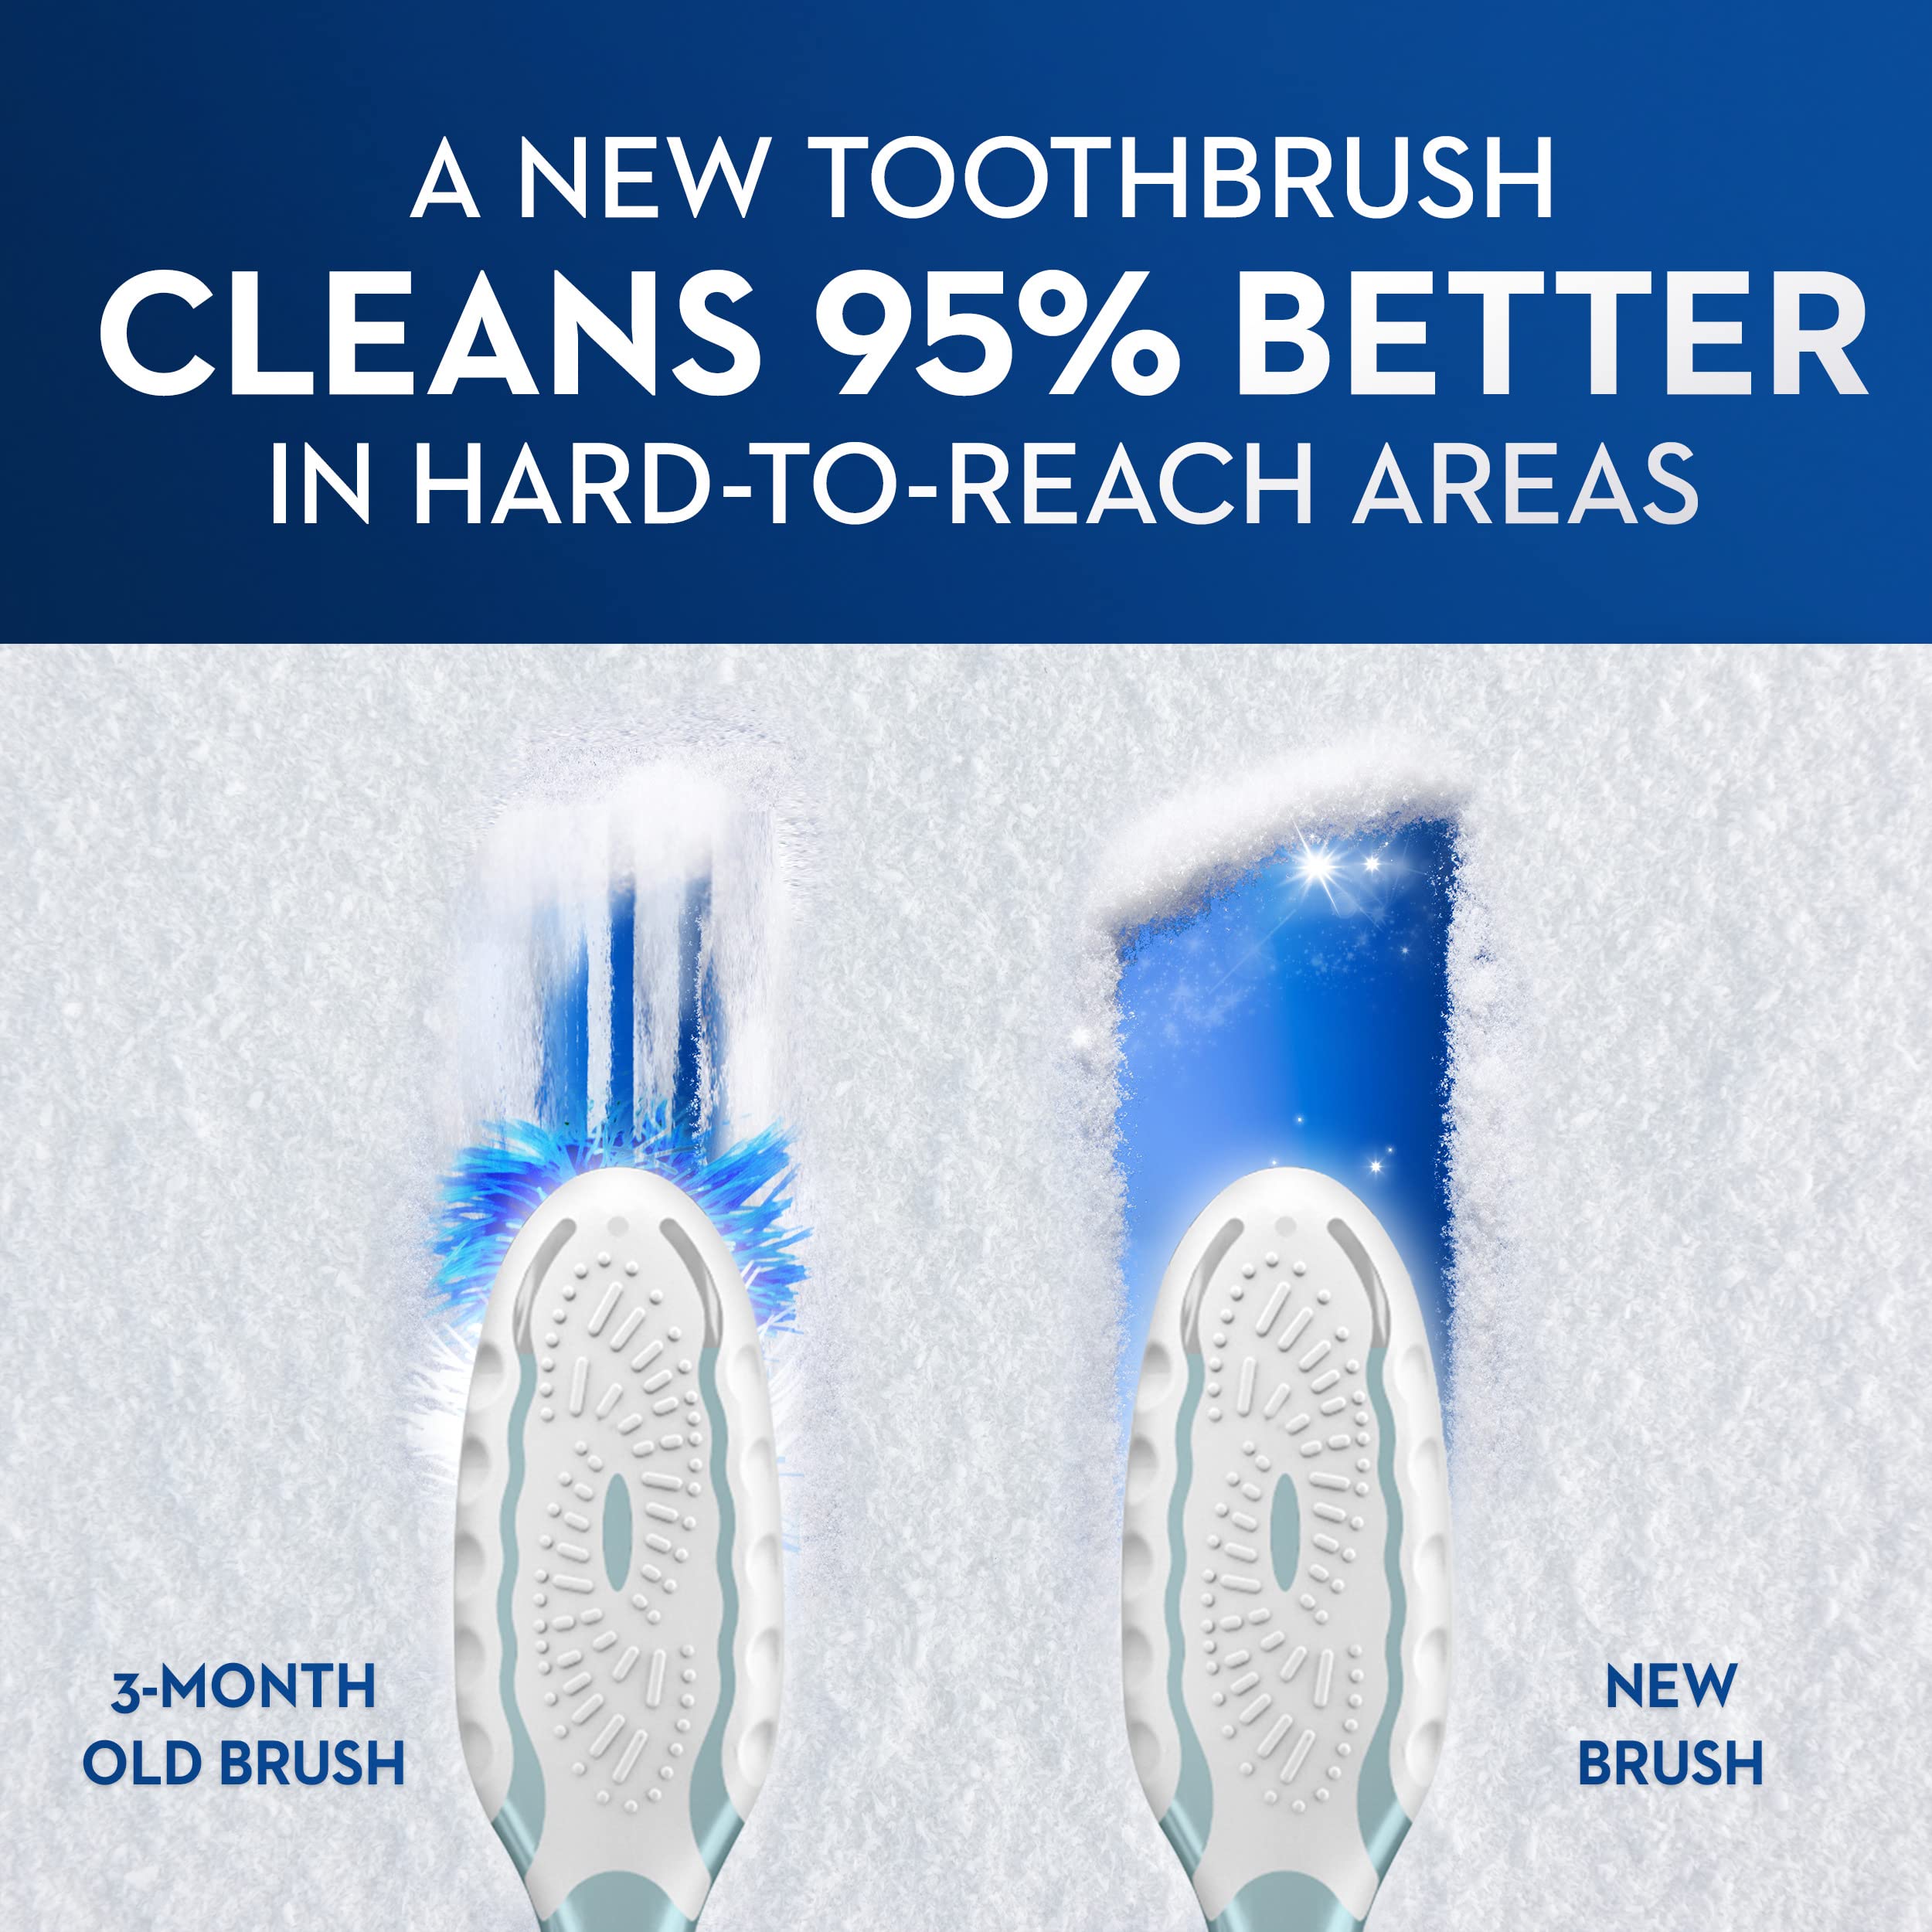 Oral-B CrossAction All In One Soft Toothbrushes, Deep Plaque Removal, 6 Count